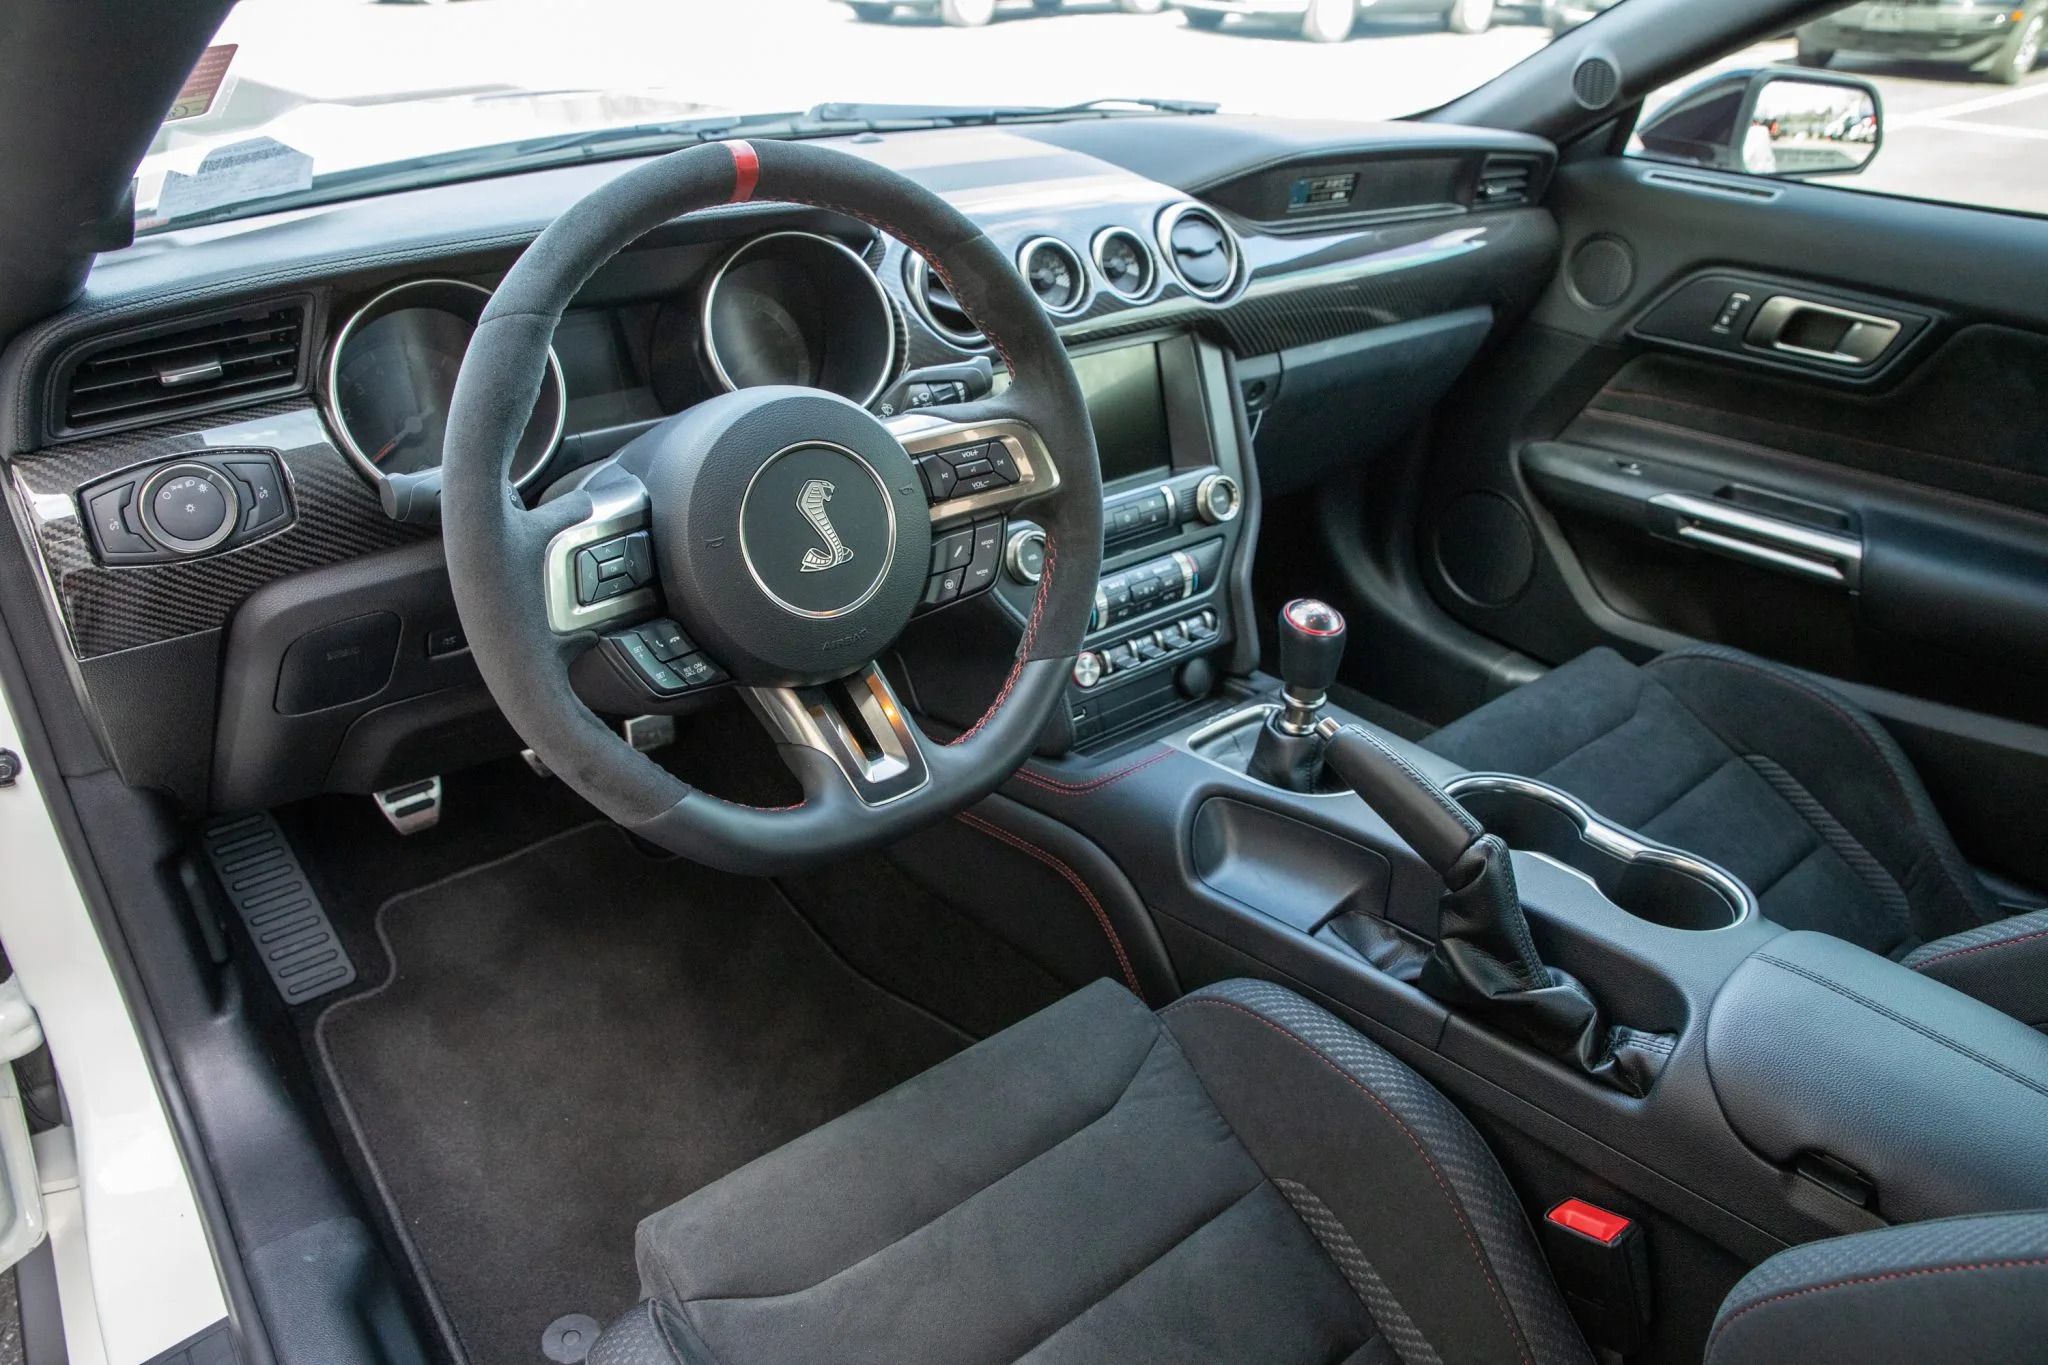 2020 Ford Mustang Shelby GT350R Heritage Edition Interior